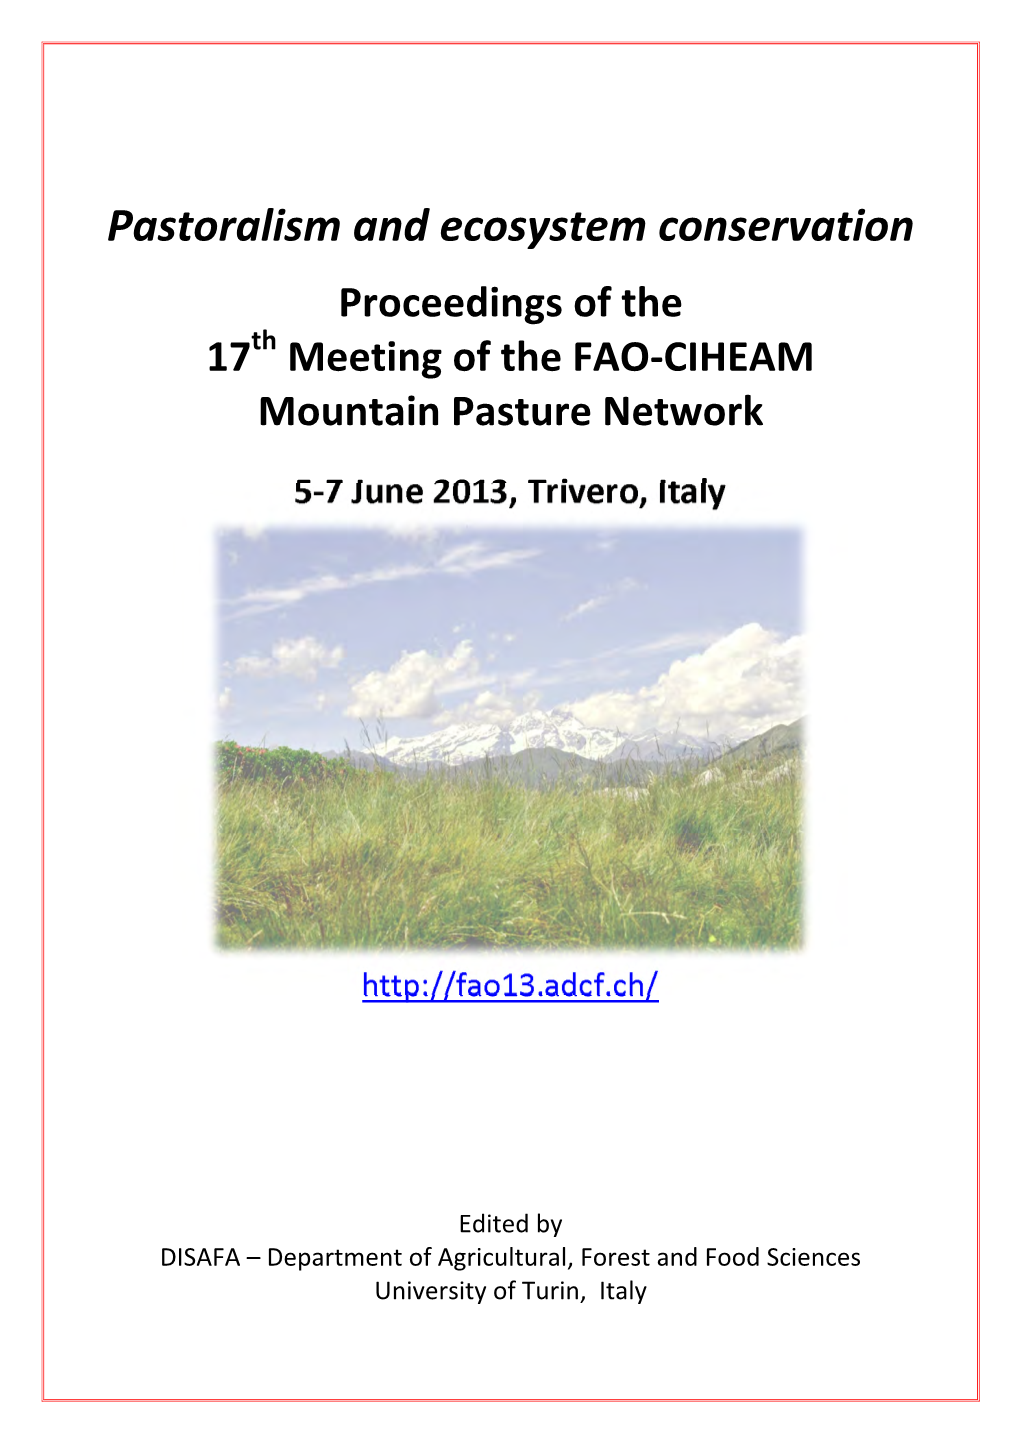 Pastoralism and Ecosystem Conservation Proceedings of the 17Th Meeting of the FAO-CIHEAM Mountain Pasture Network